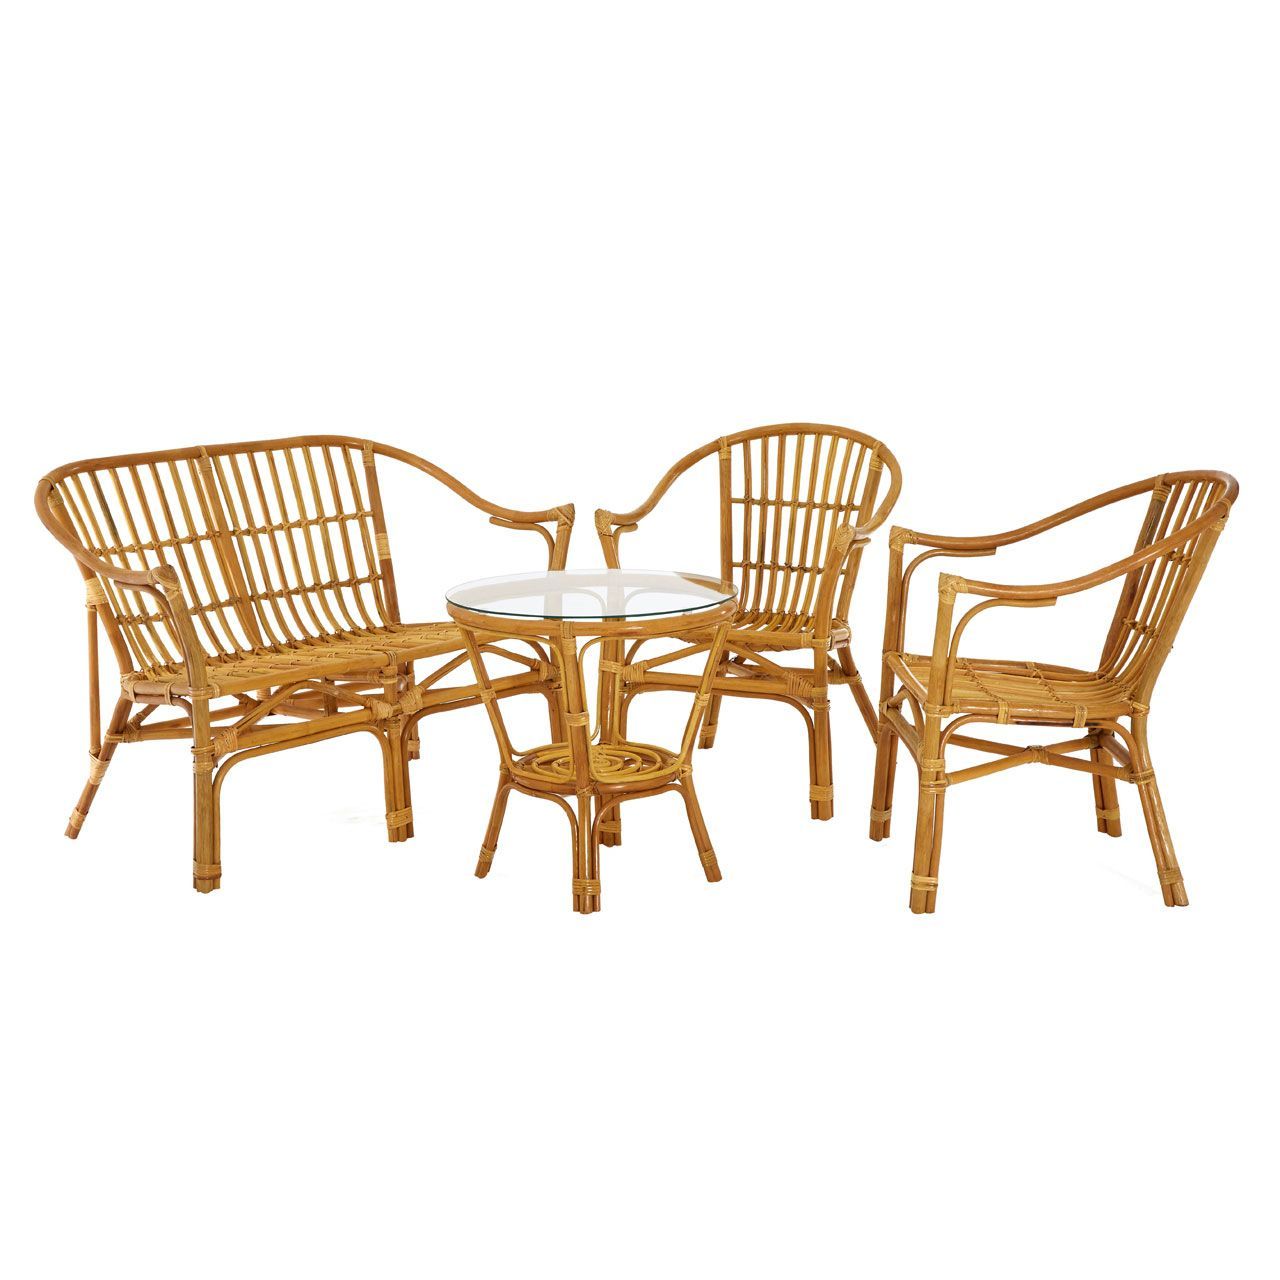 The Beauty and Comfort of Rattan Conservatory Furniture